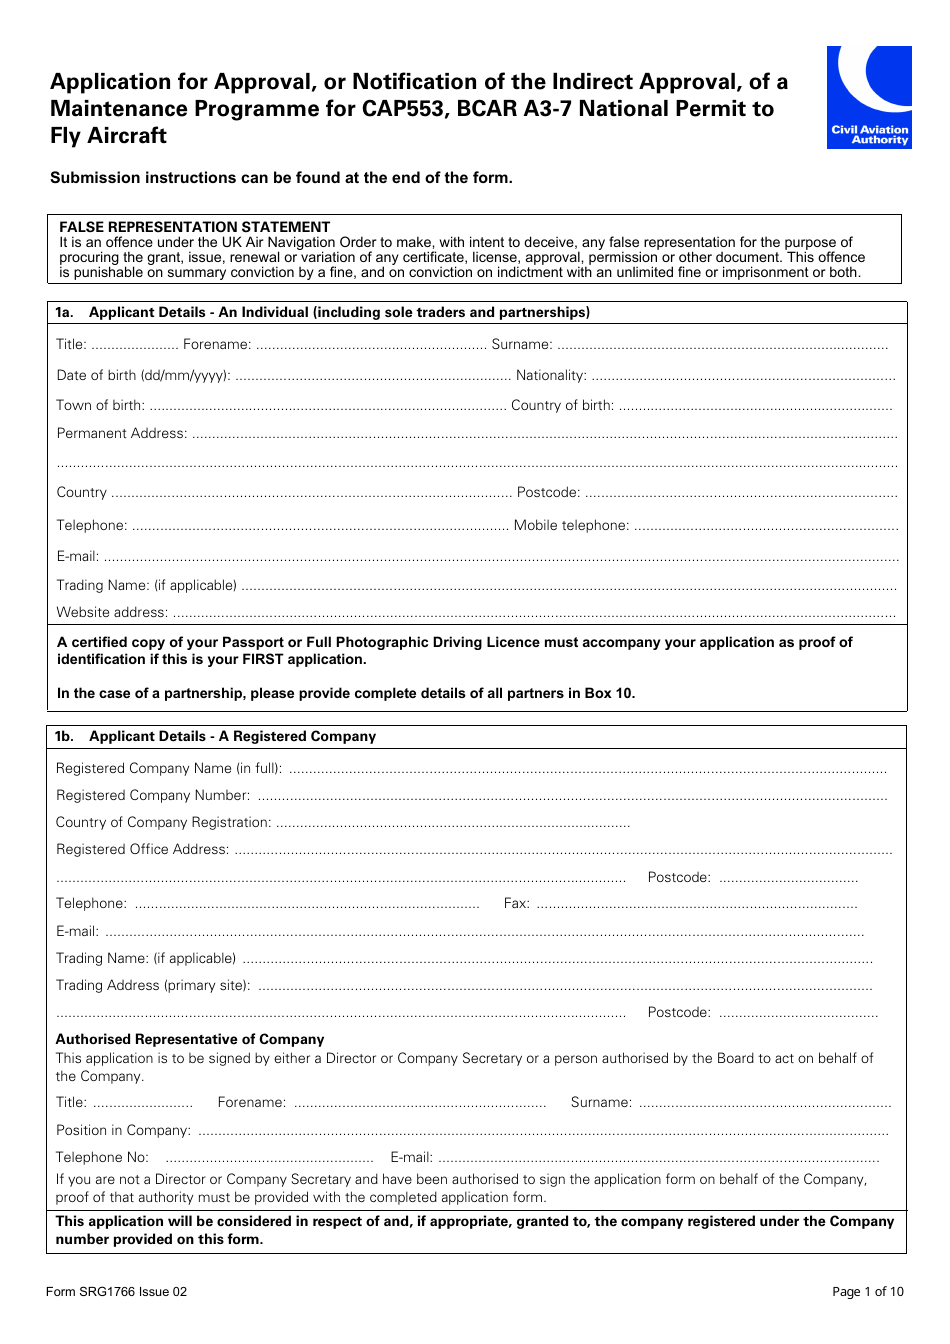 Form SRG1766 Application for Approval or Notification of the Indirect Approval, of a Maintenance Programme for Cap553, Bcar A3-7 National Permit to Fly Aircraft - United Kingdom, Page 1